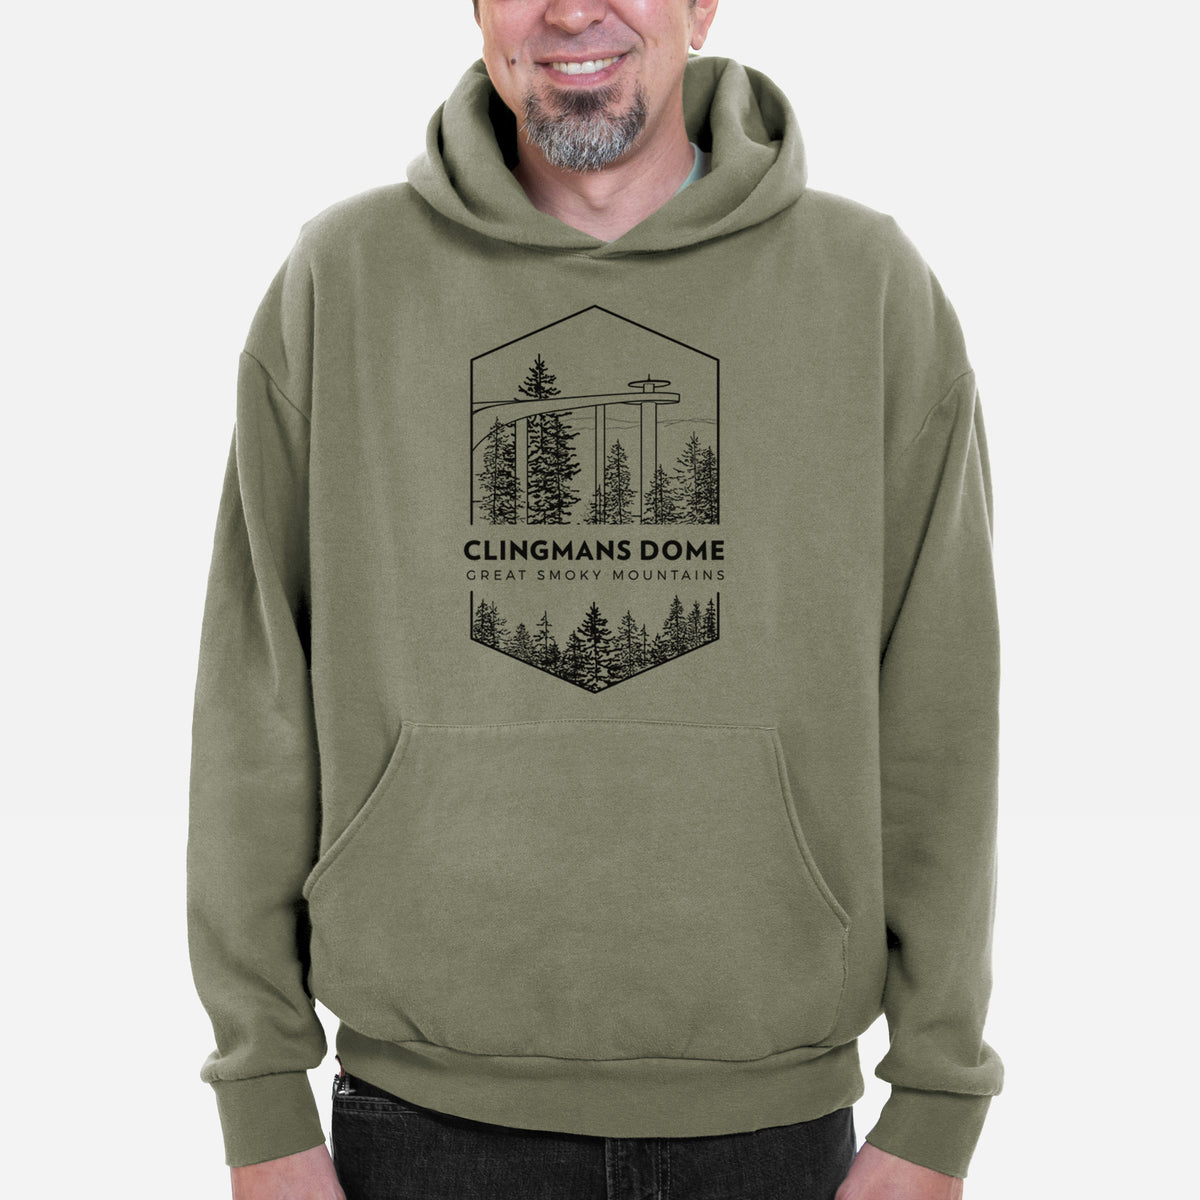 Clingmans Dome - Great Smoky Mountains National Park  - Bodega Midweight Hoodie